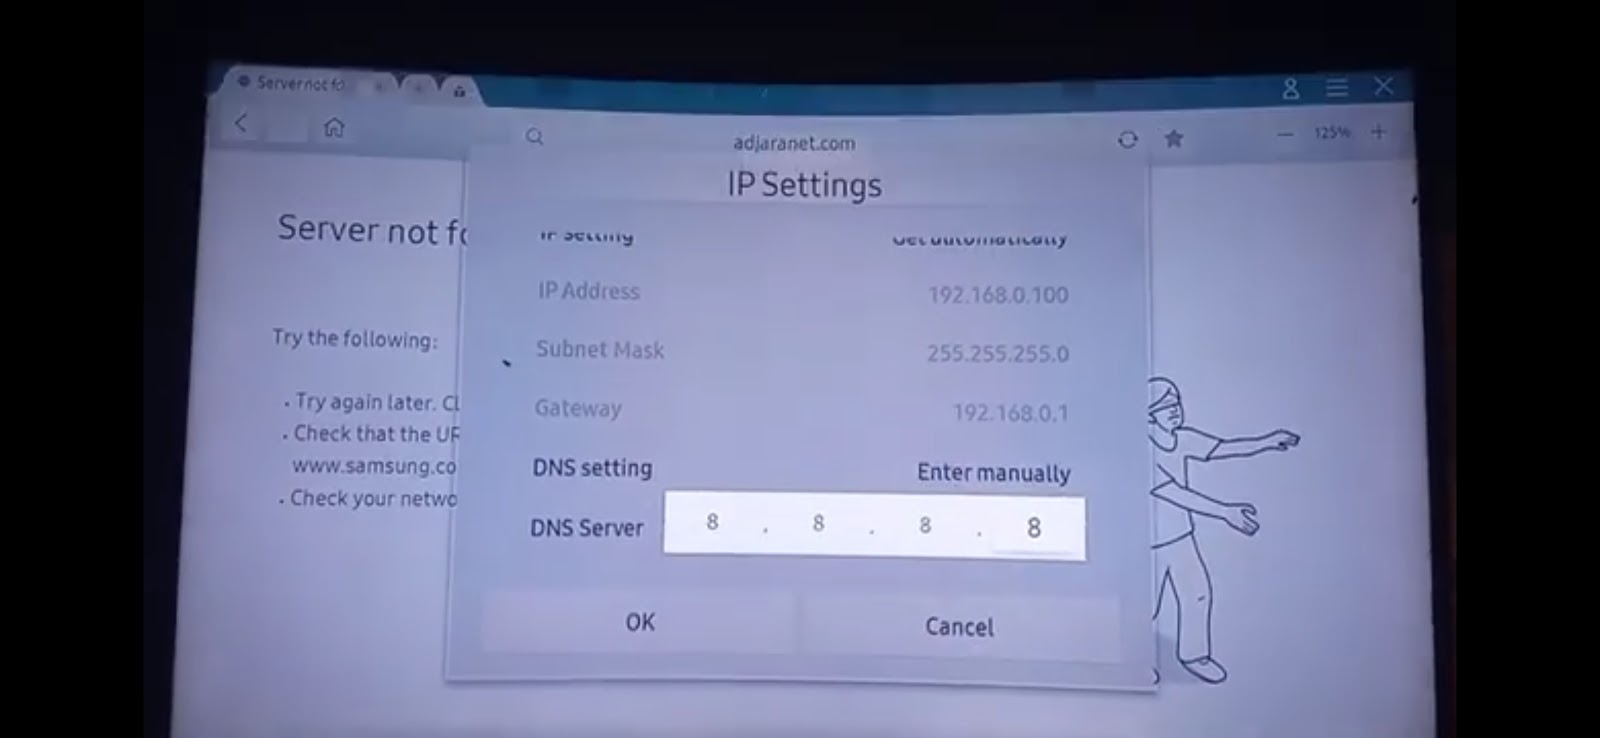 changing DNS settings on Samsung 7 series TV